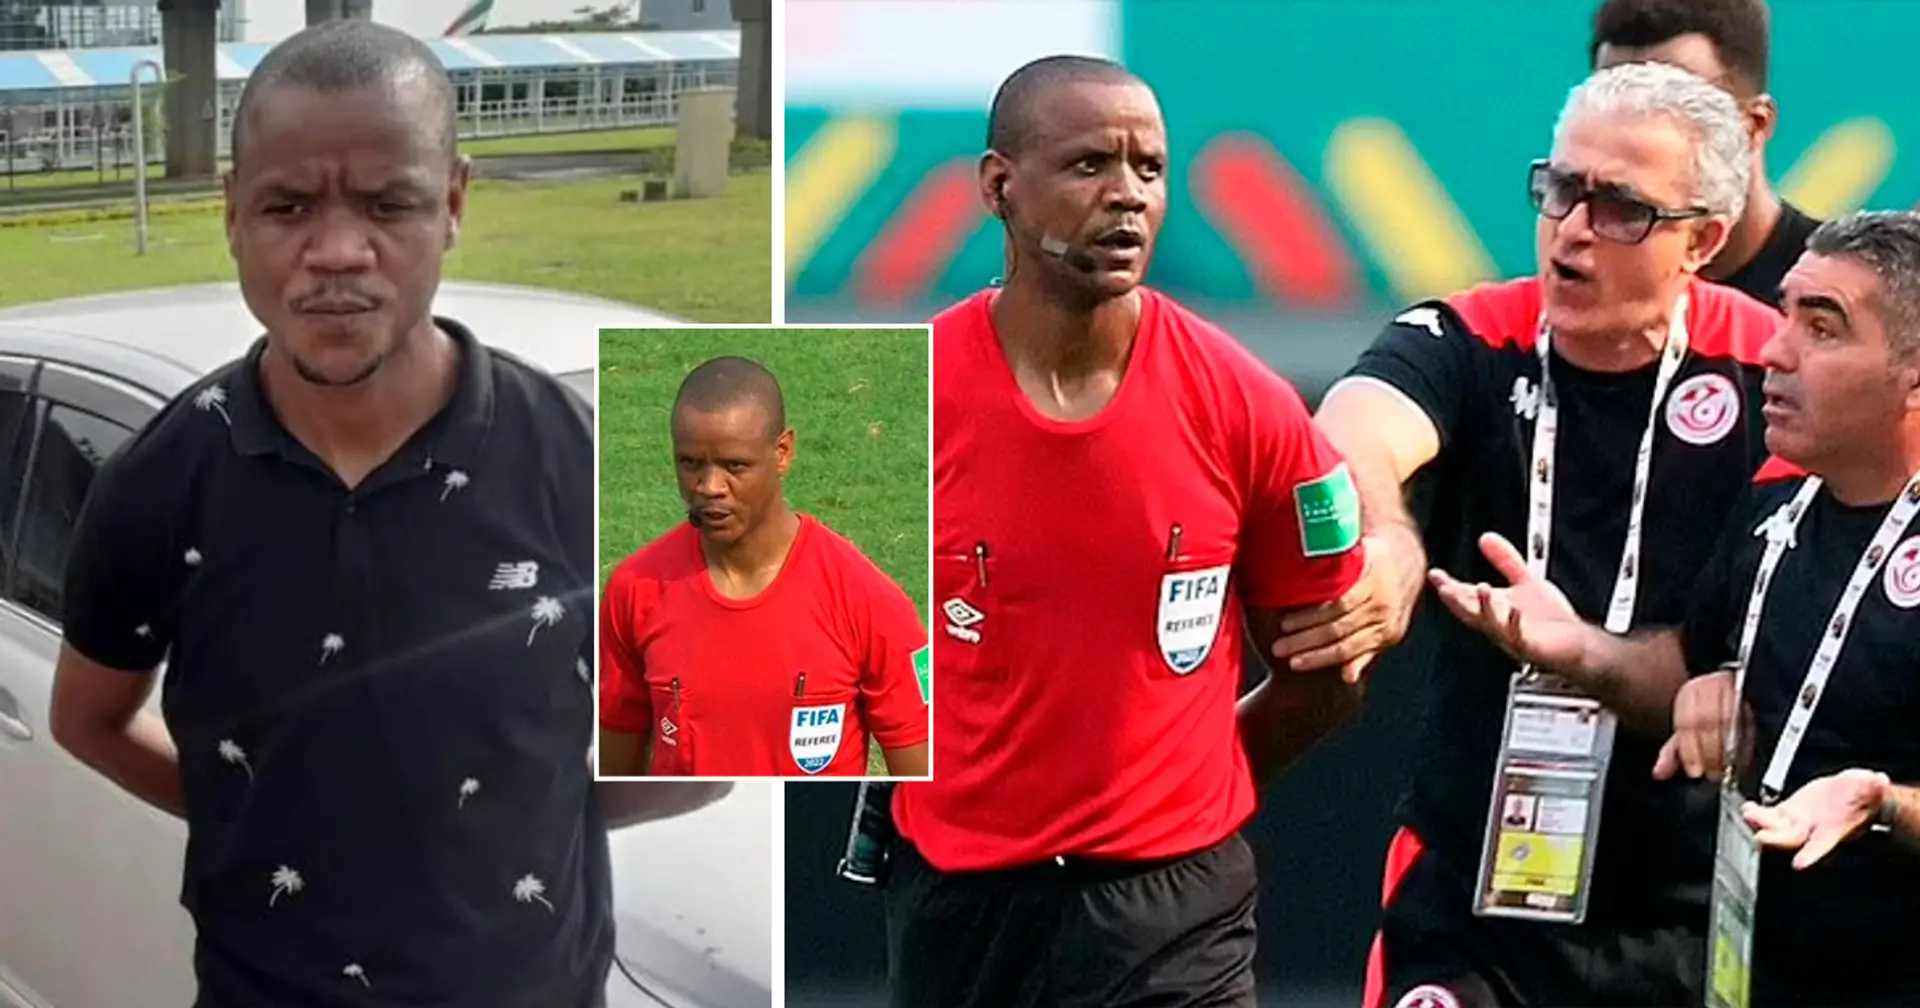 'God told me to end the match': Zambian referee reveals why he stopped AFCON game early twice